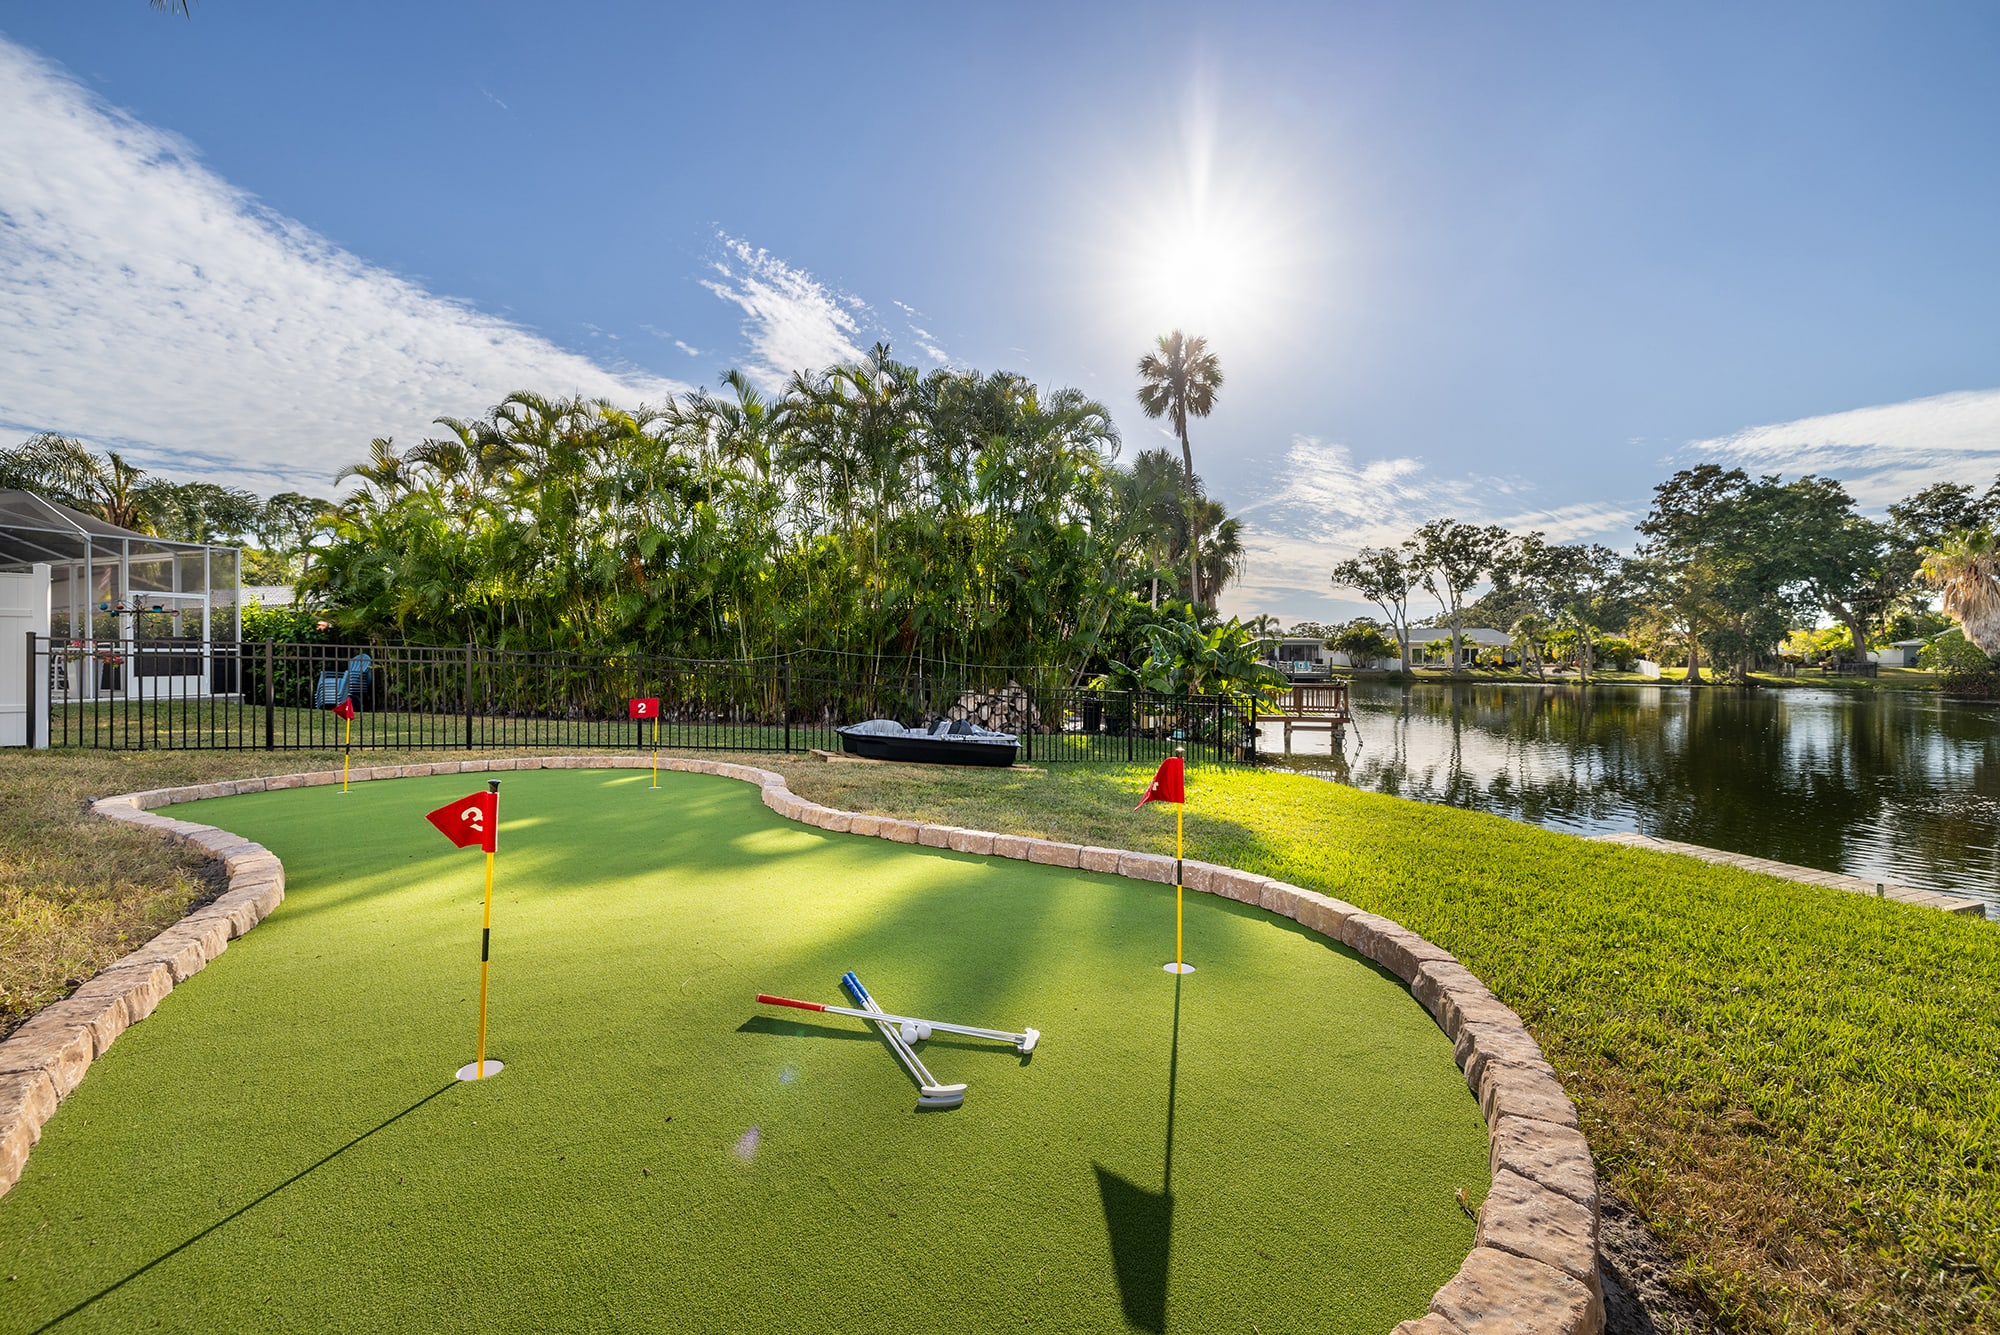 Up for a game of Putt Putt?